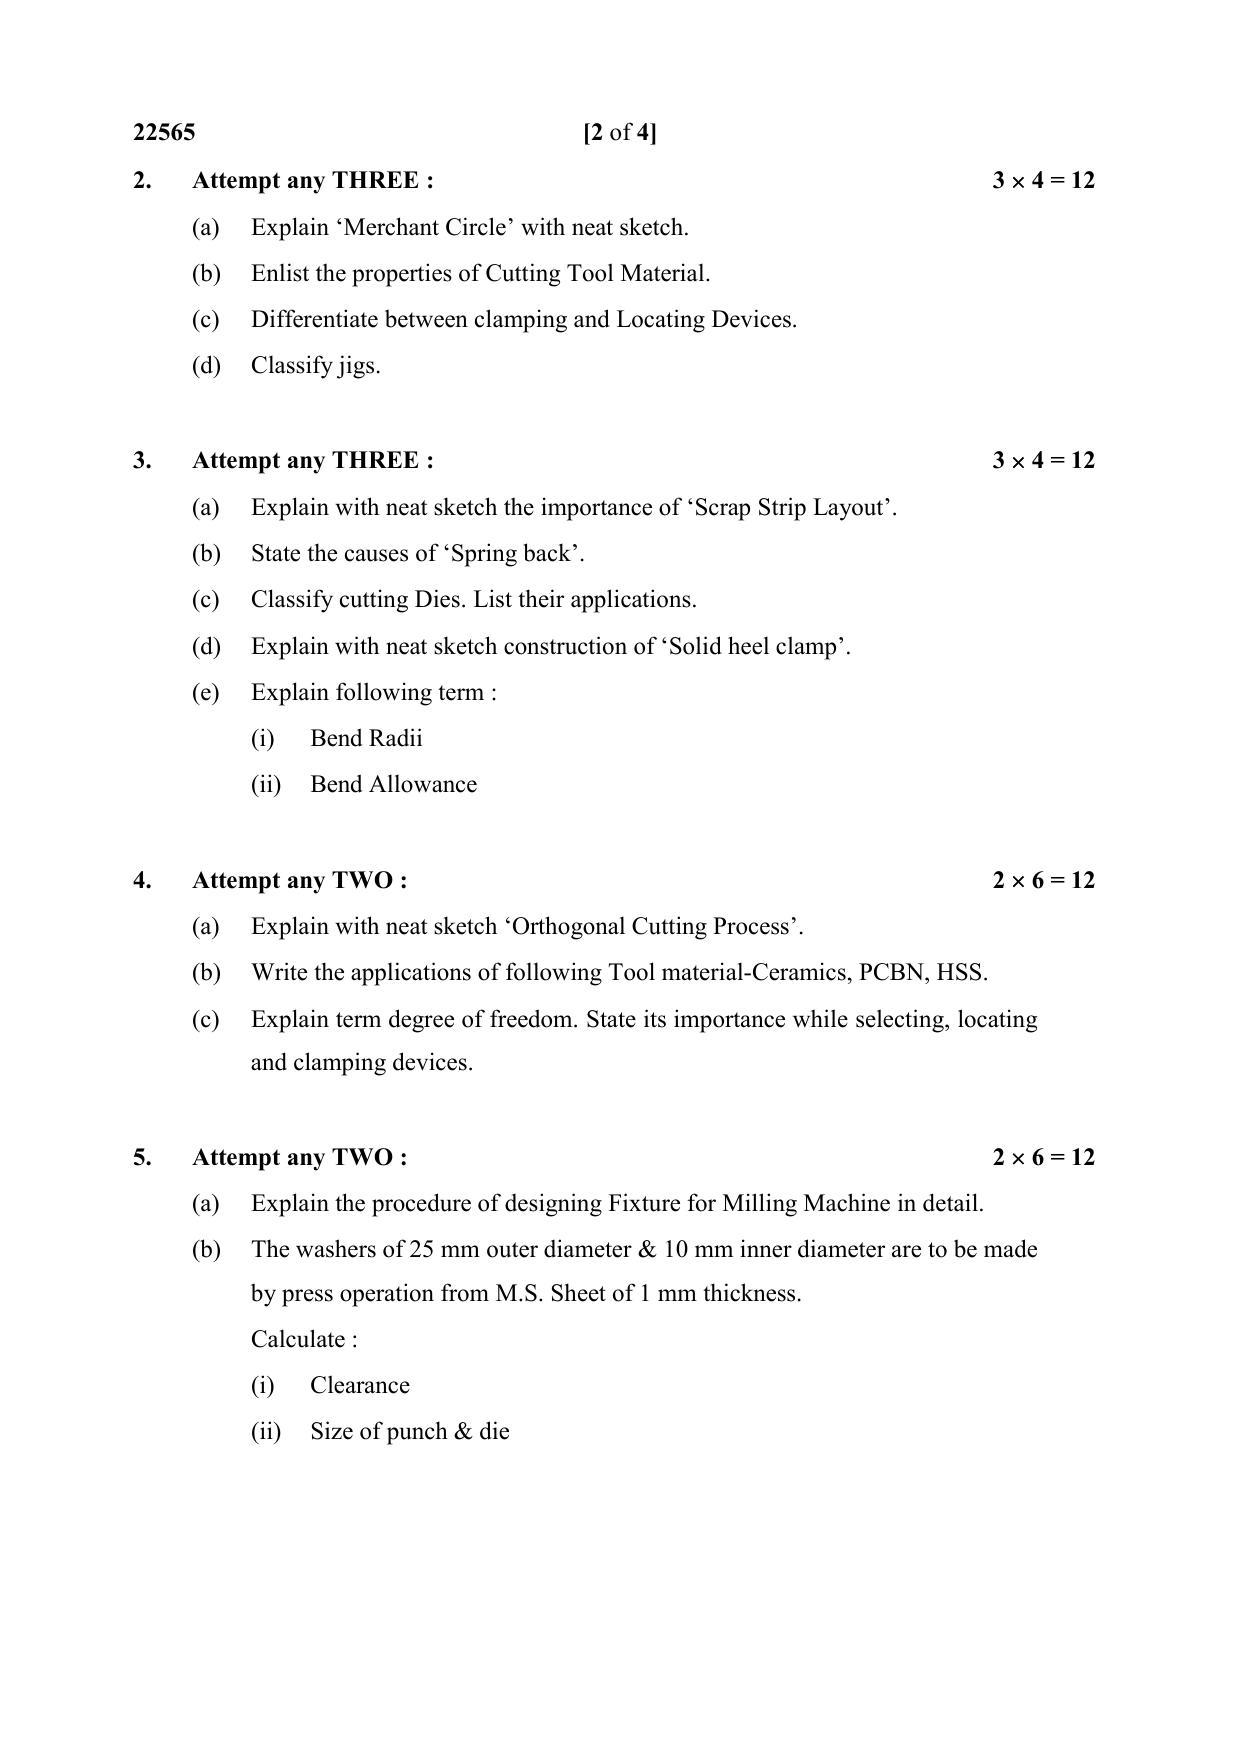 MSBTE Question Paper - 2019 - Tool Engineering (Elective) - Page 2